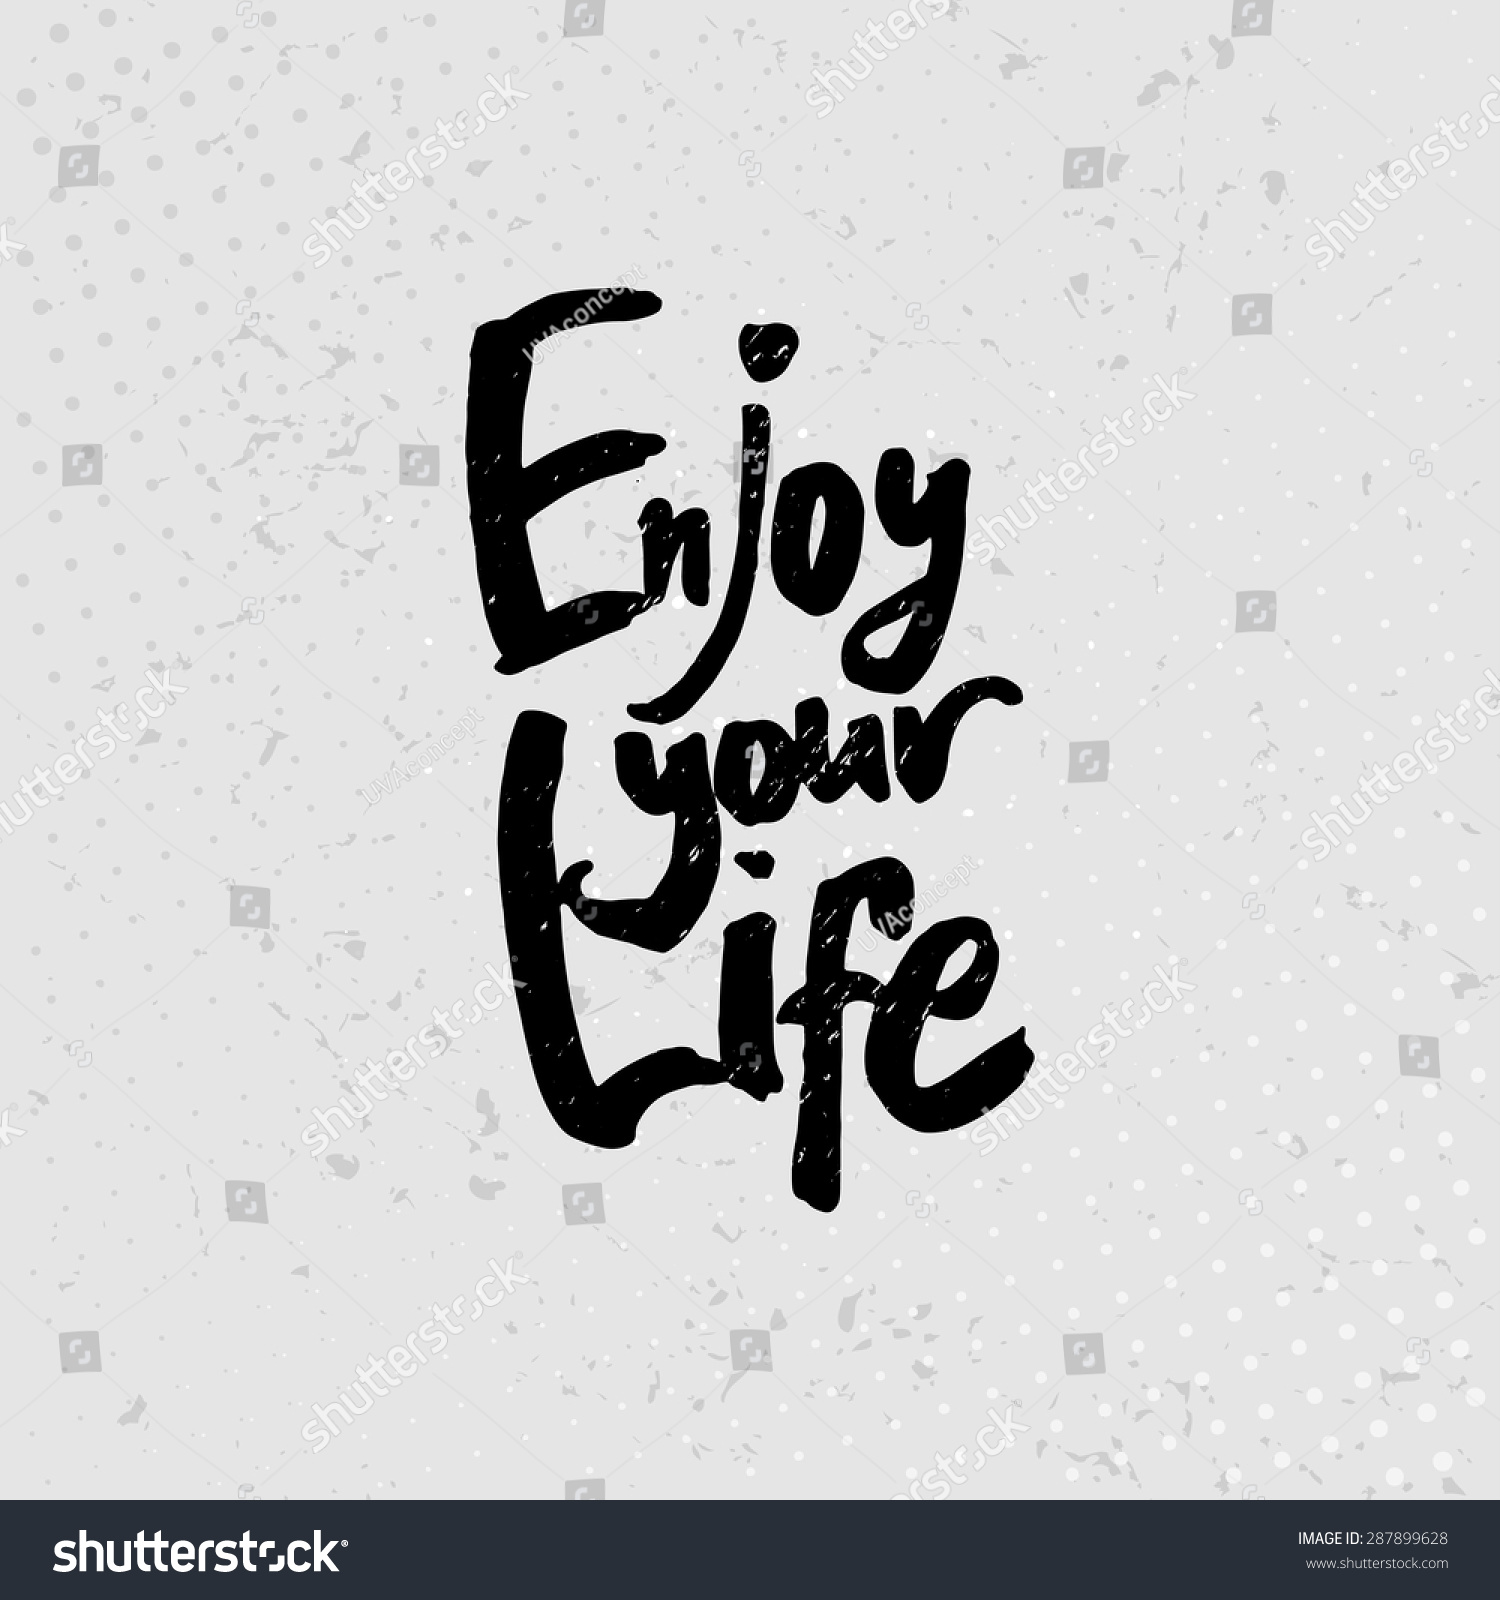 Enjoy your life hand drawn quotes black on grunge background Vector